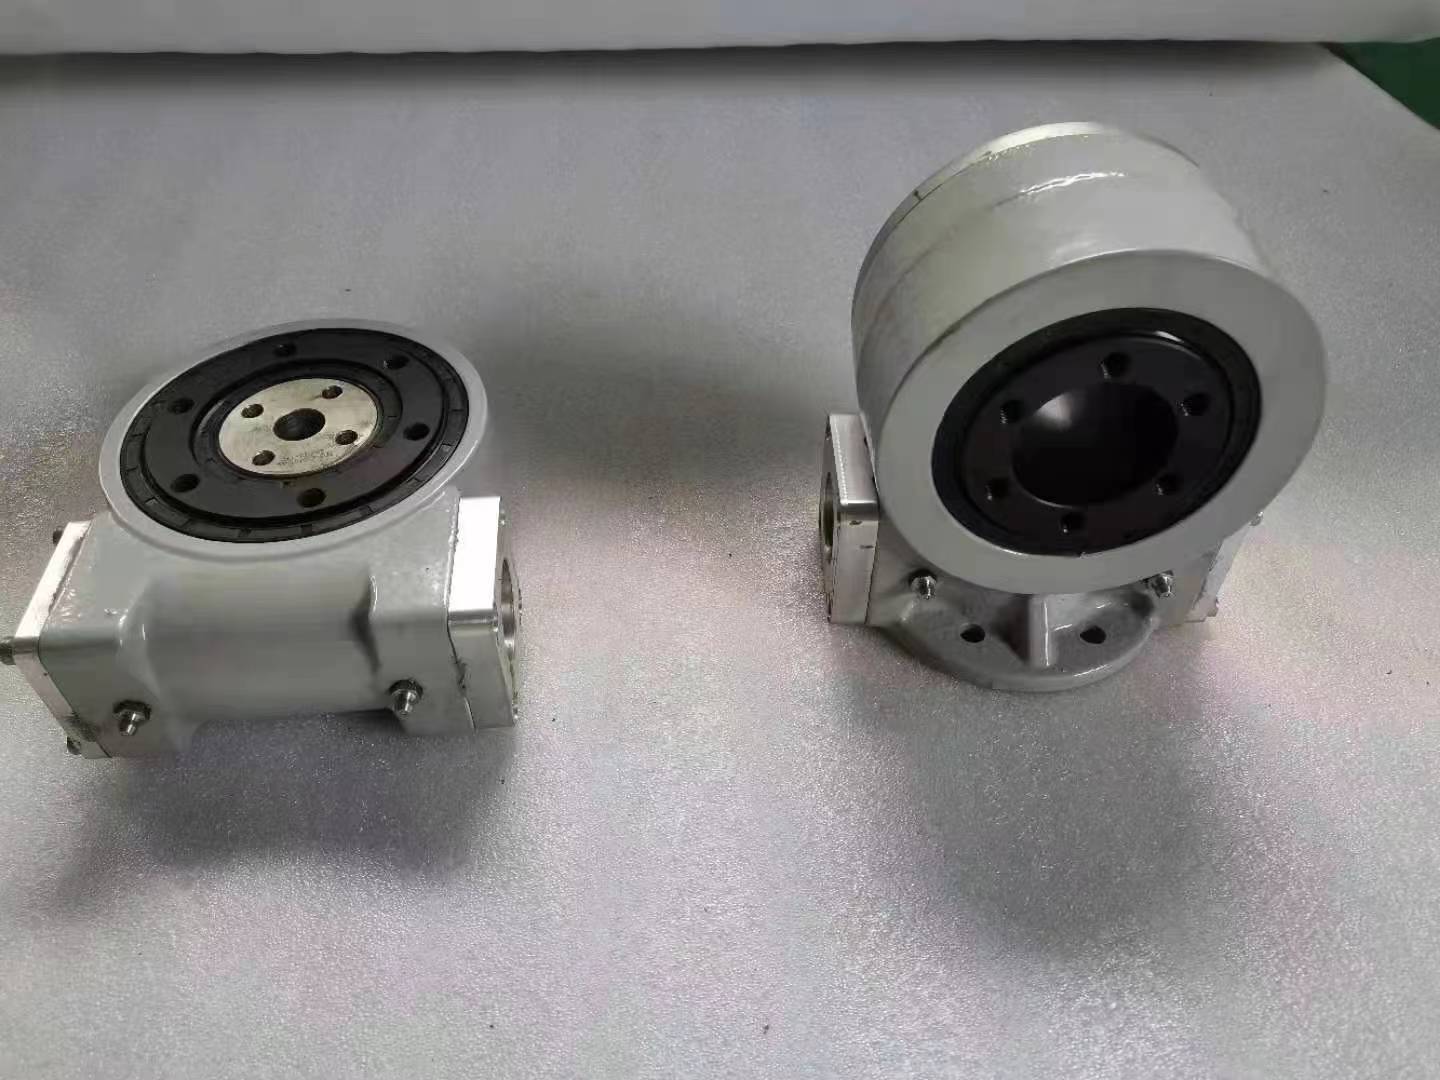 24VDC Motor And Encoders Dual Axis Slew Drive